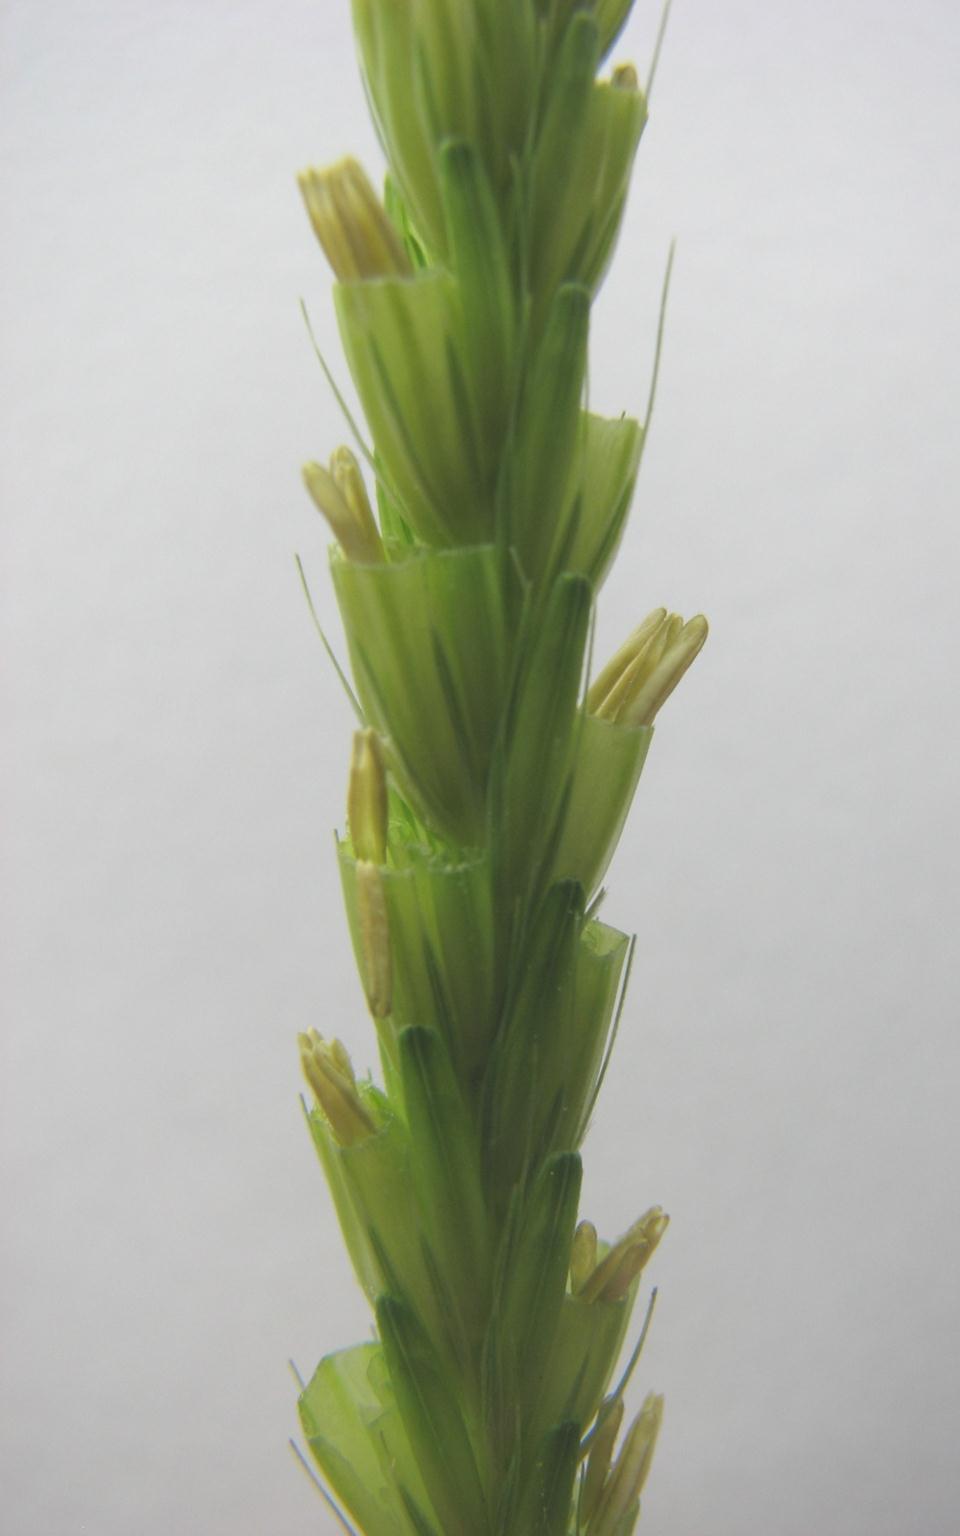 One to five minutes after clipping the spikelets of the male, the anthers start to enlarge (puff up).